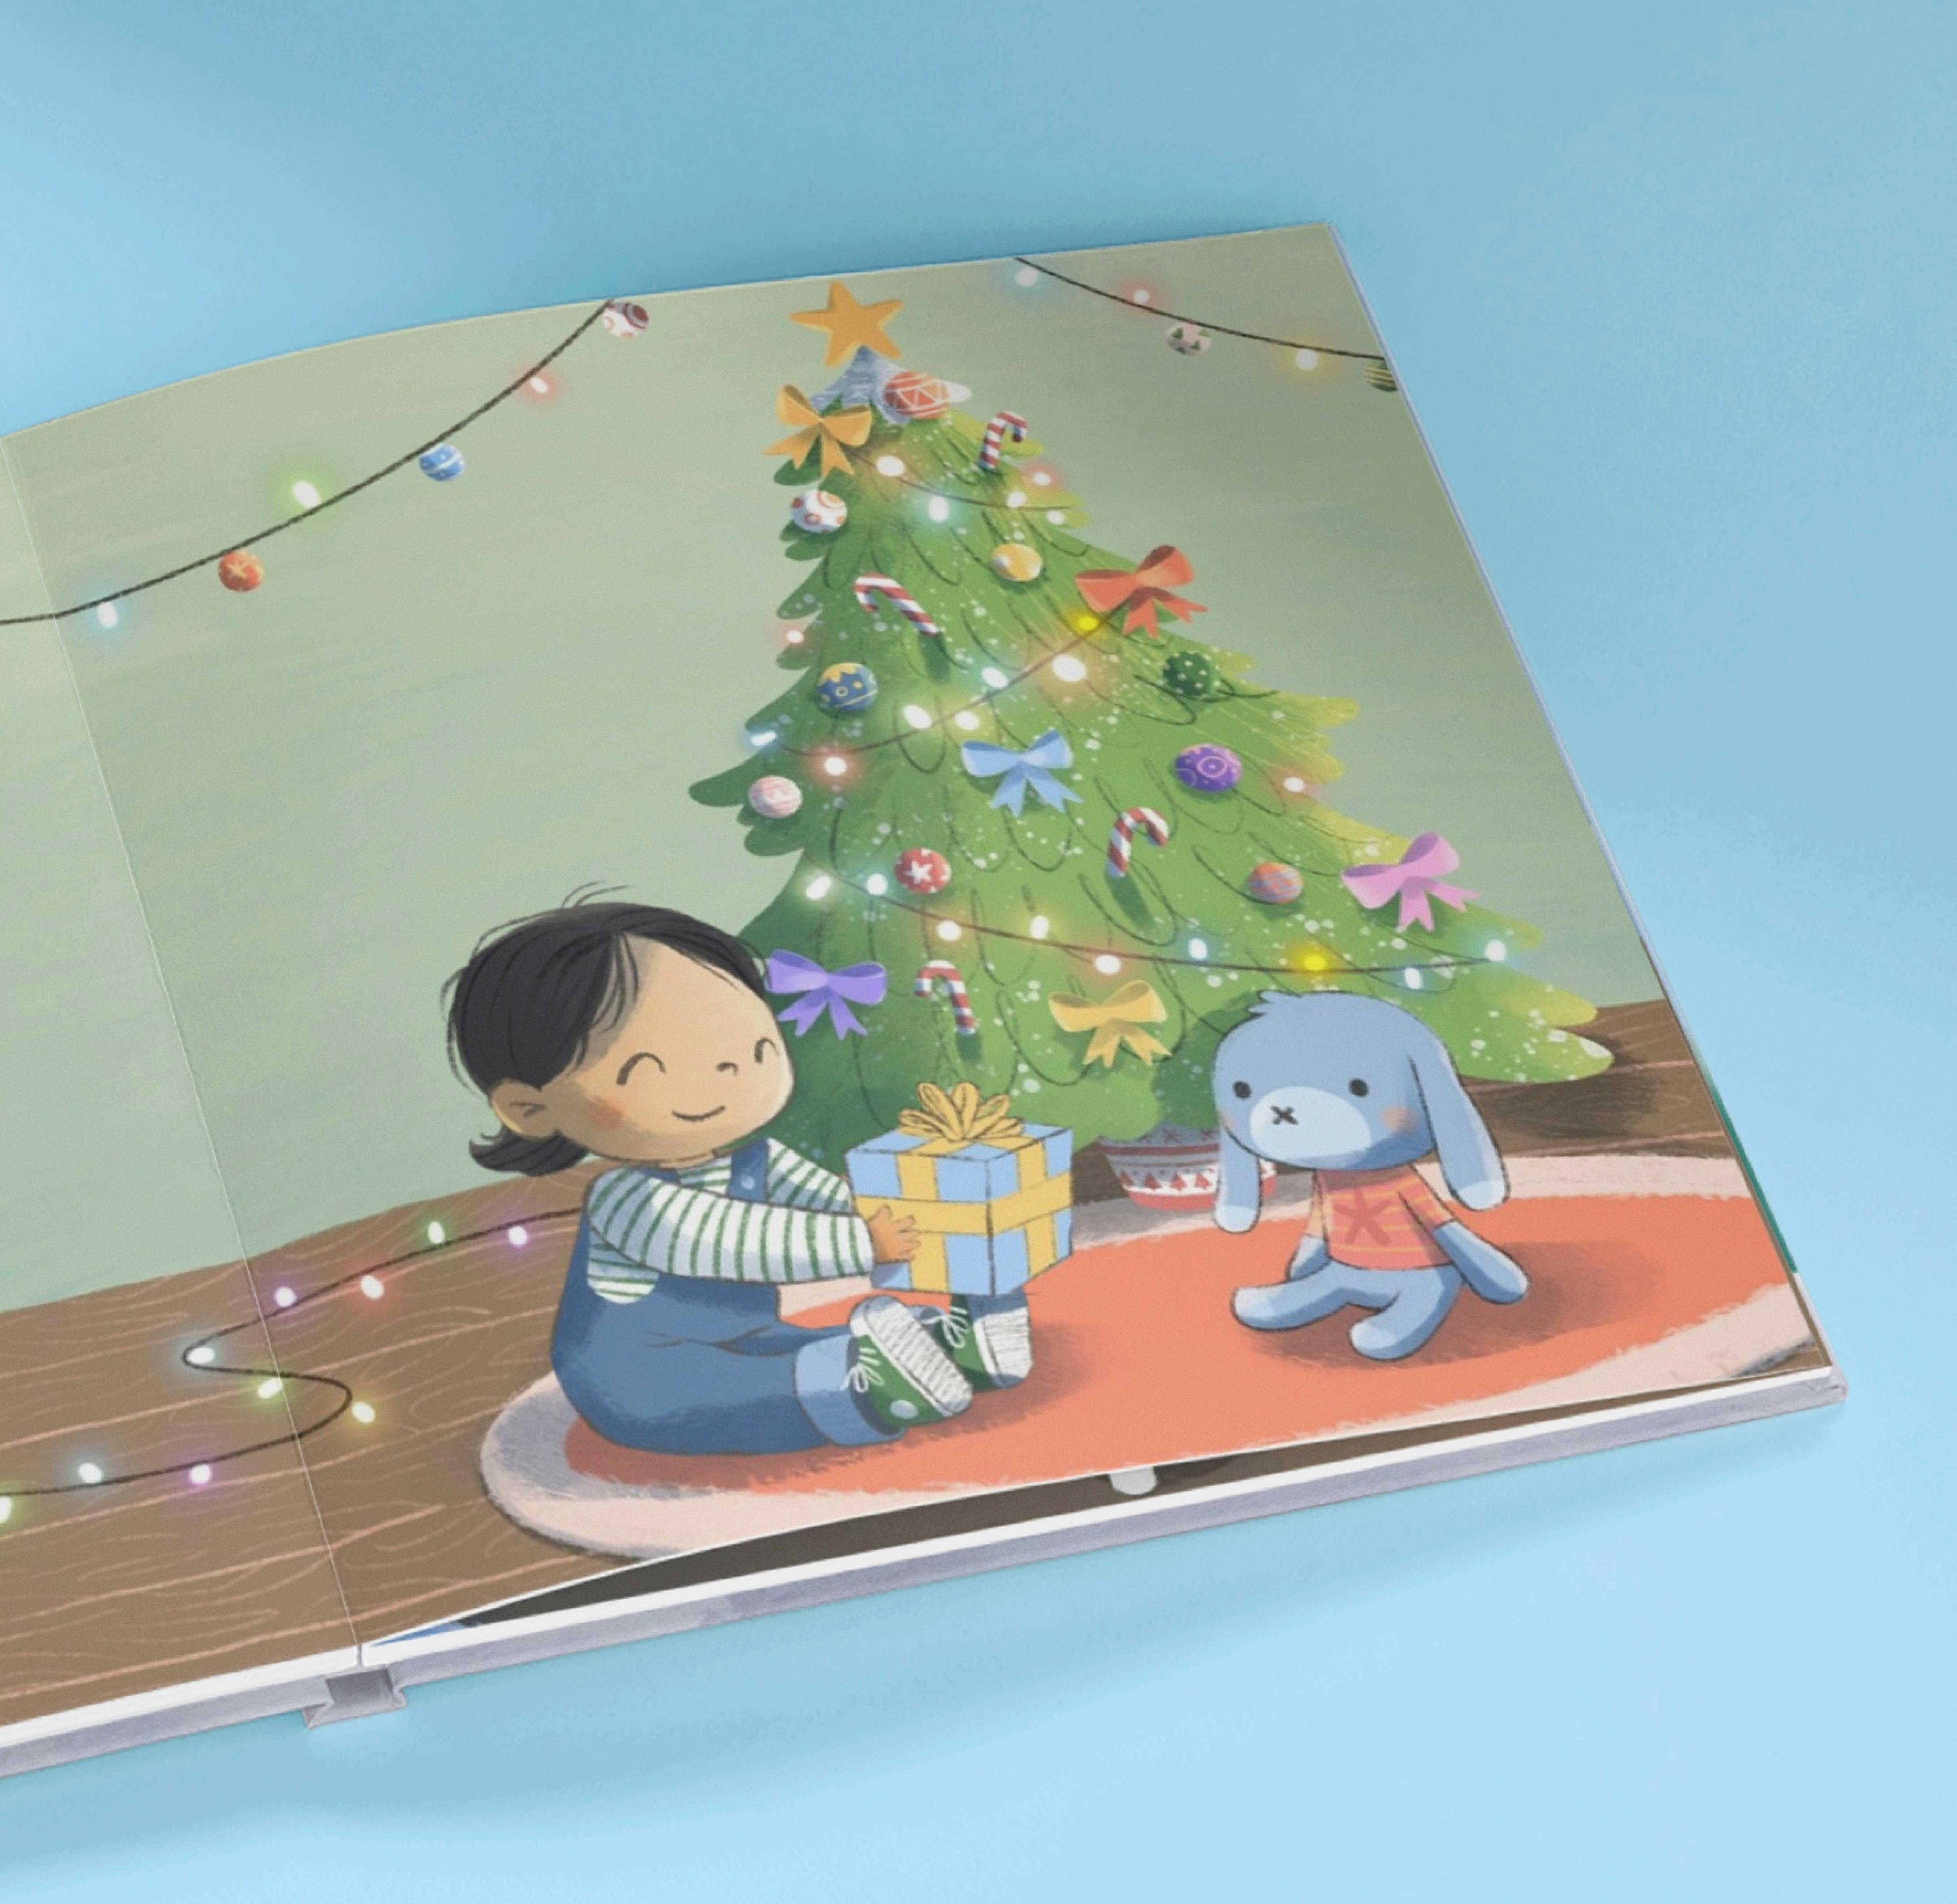 Page inside the book showing artwork of a personalised avatar opening presents